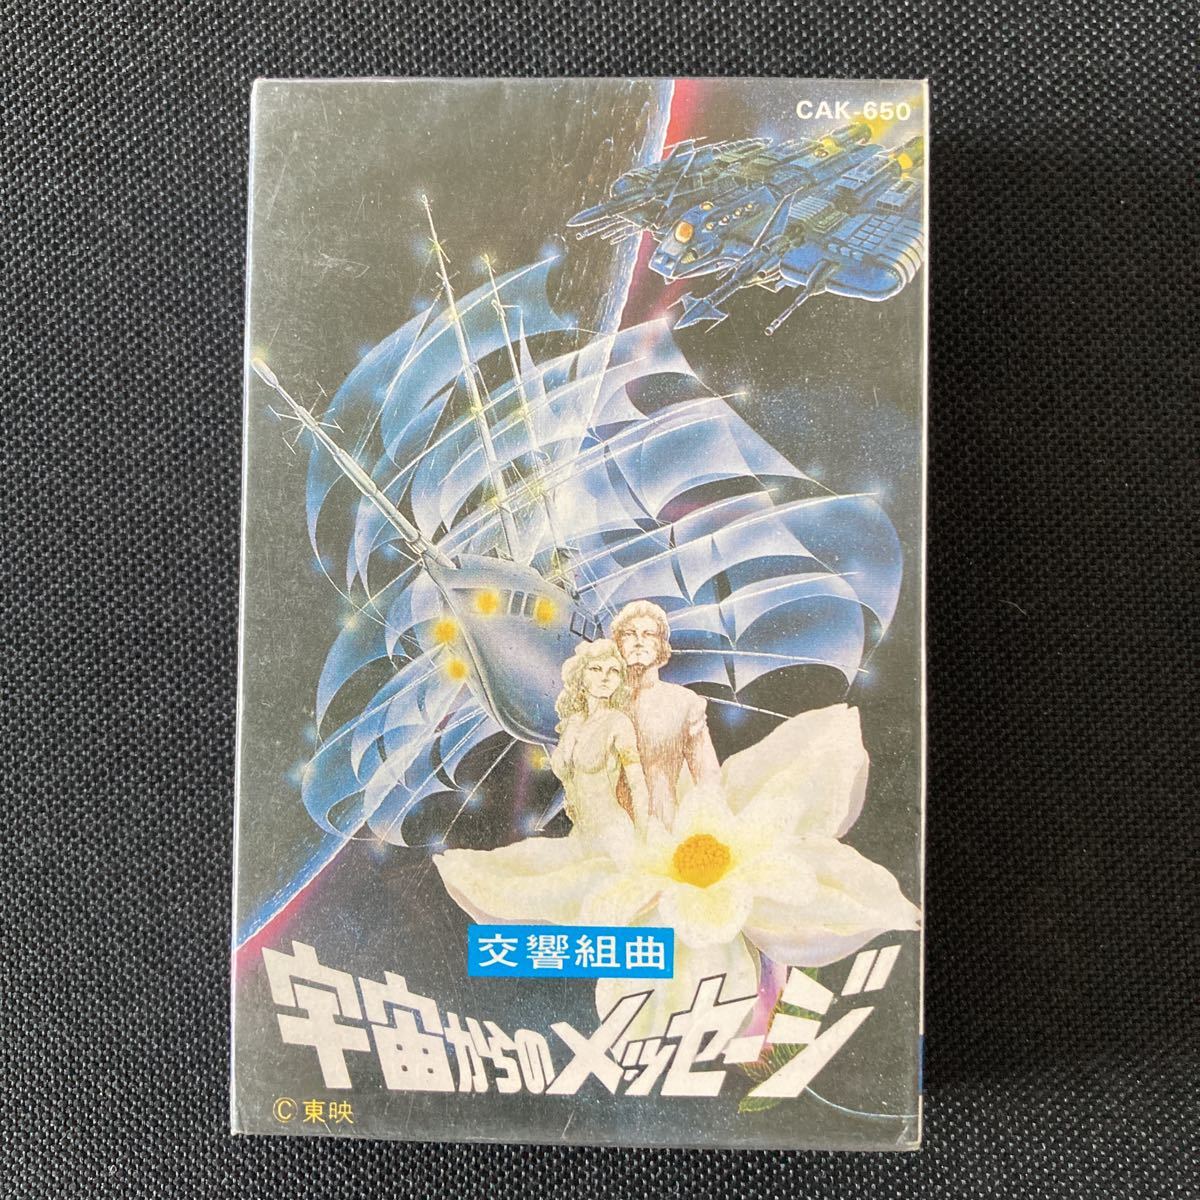  unopened new old goods # reverberation Kumikyoku # cosmos from message #45 year front. new old cassette tape # image . enlargement do condition please confirm it 